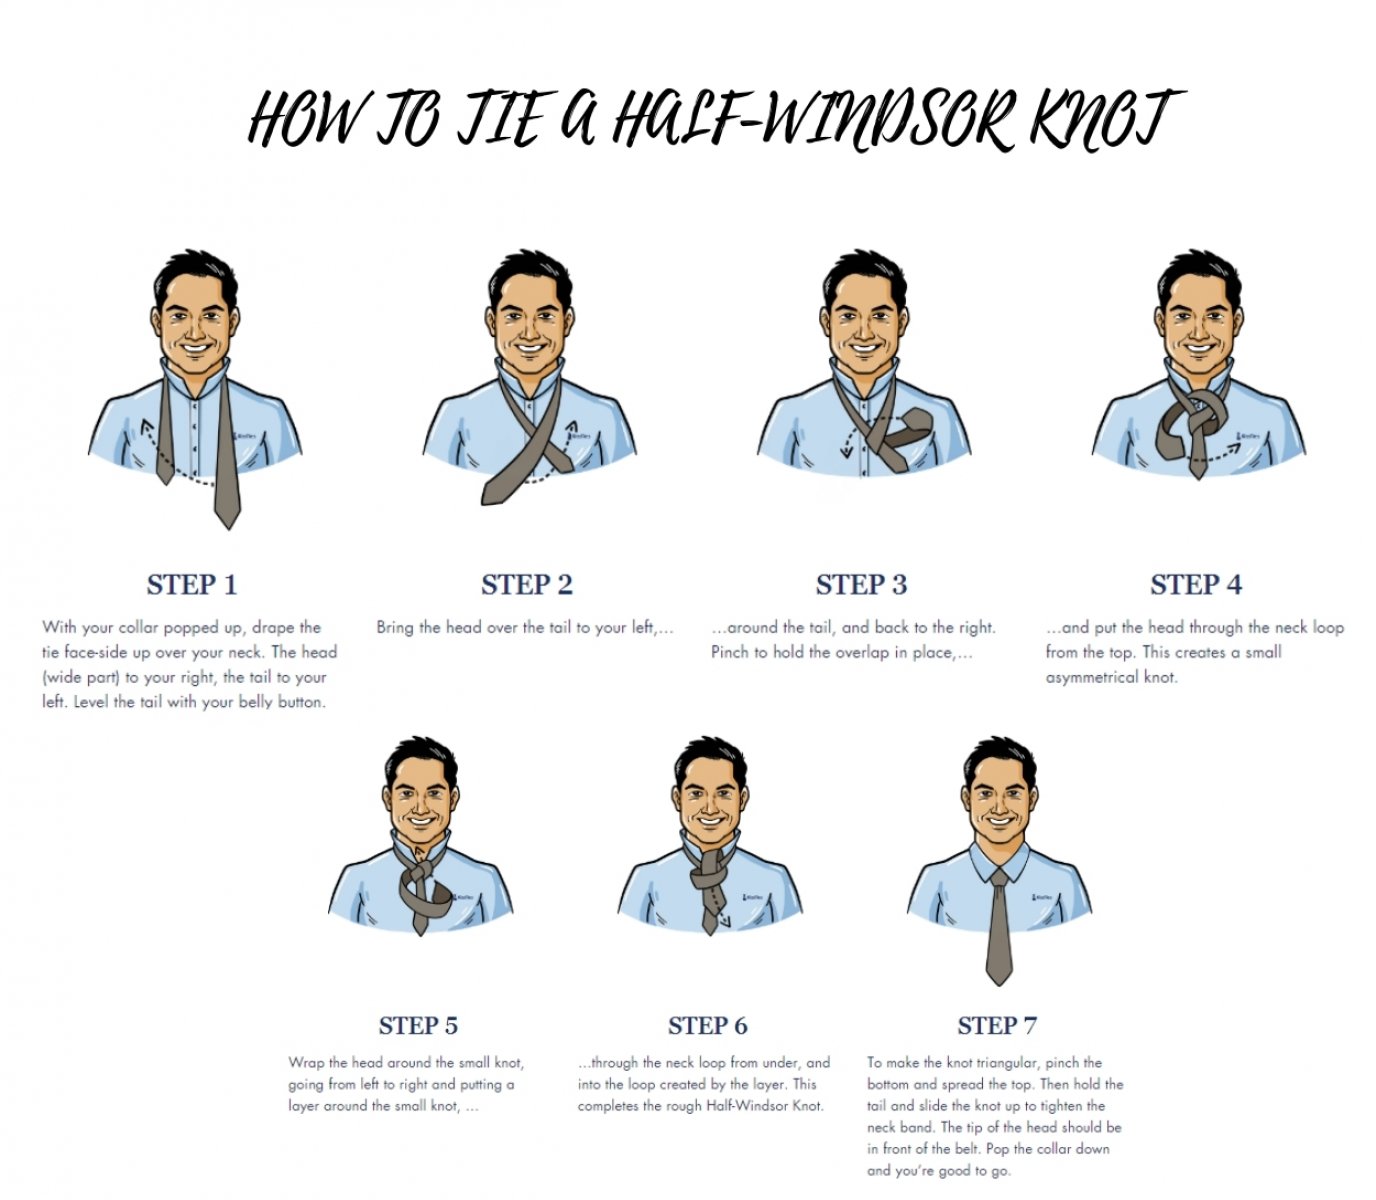 HOW TO TIE A HALF-WINDSOR KNOT